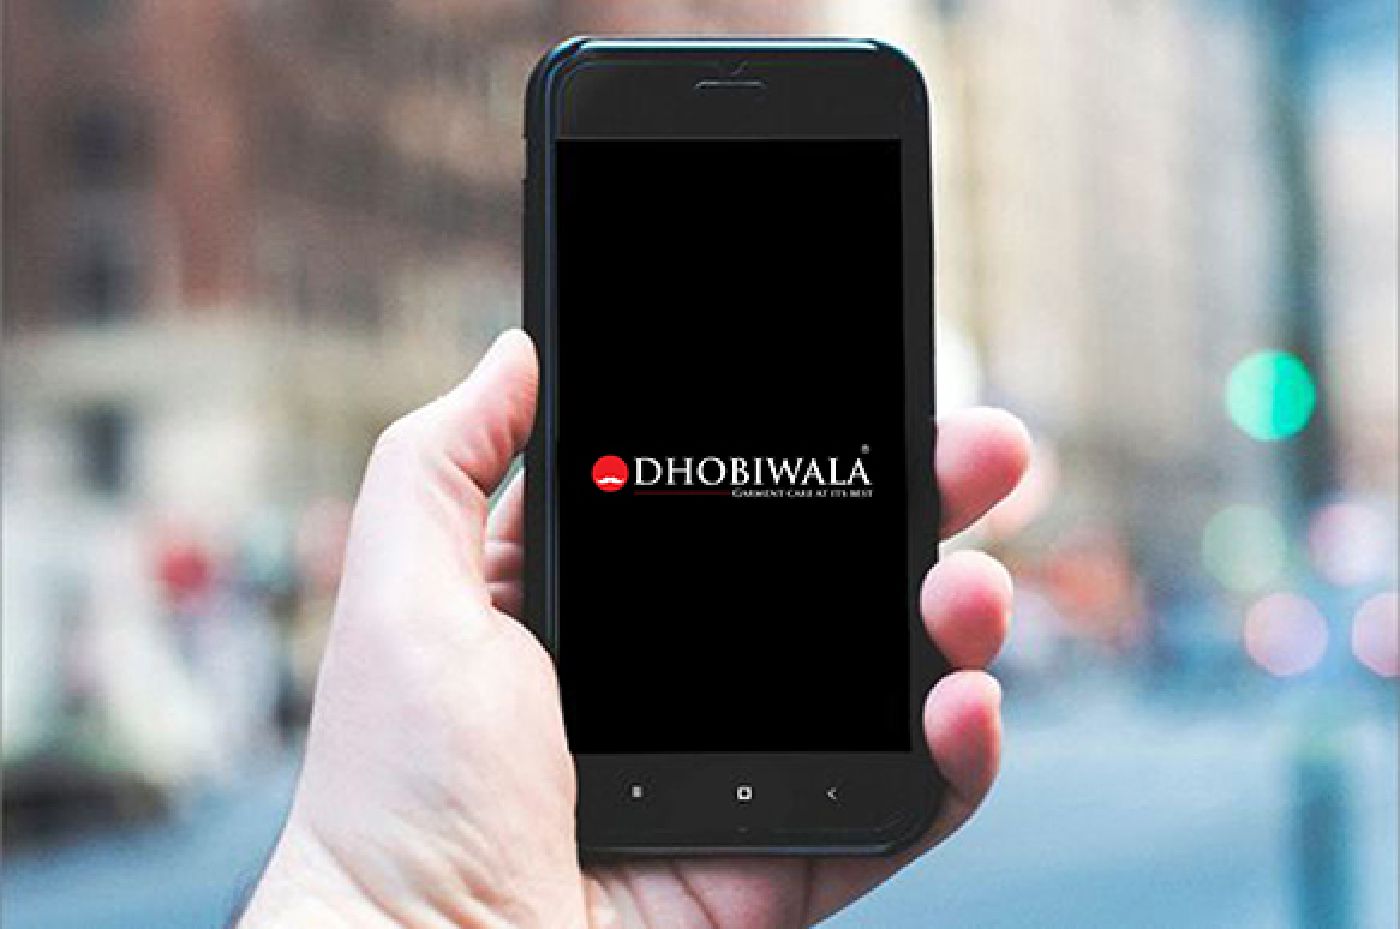 Dhobiwala: Laundry near me | Cheap and Best Online Laundry Service in India now at your doorstep